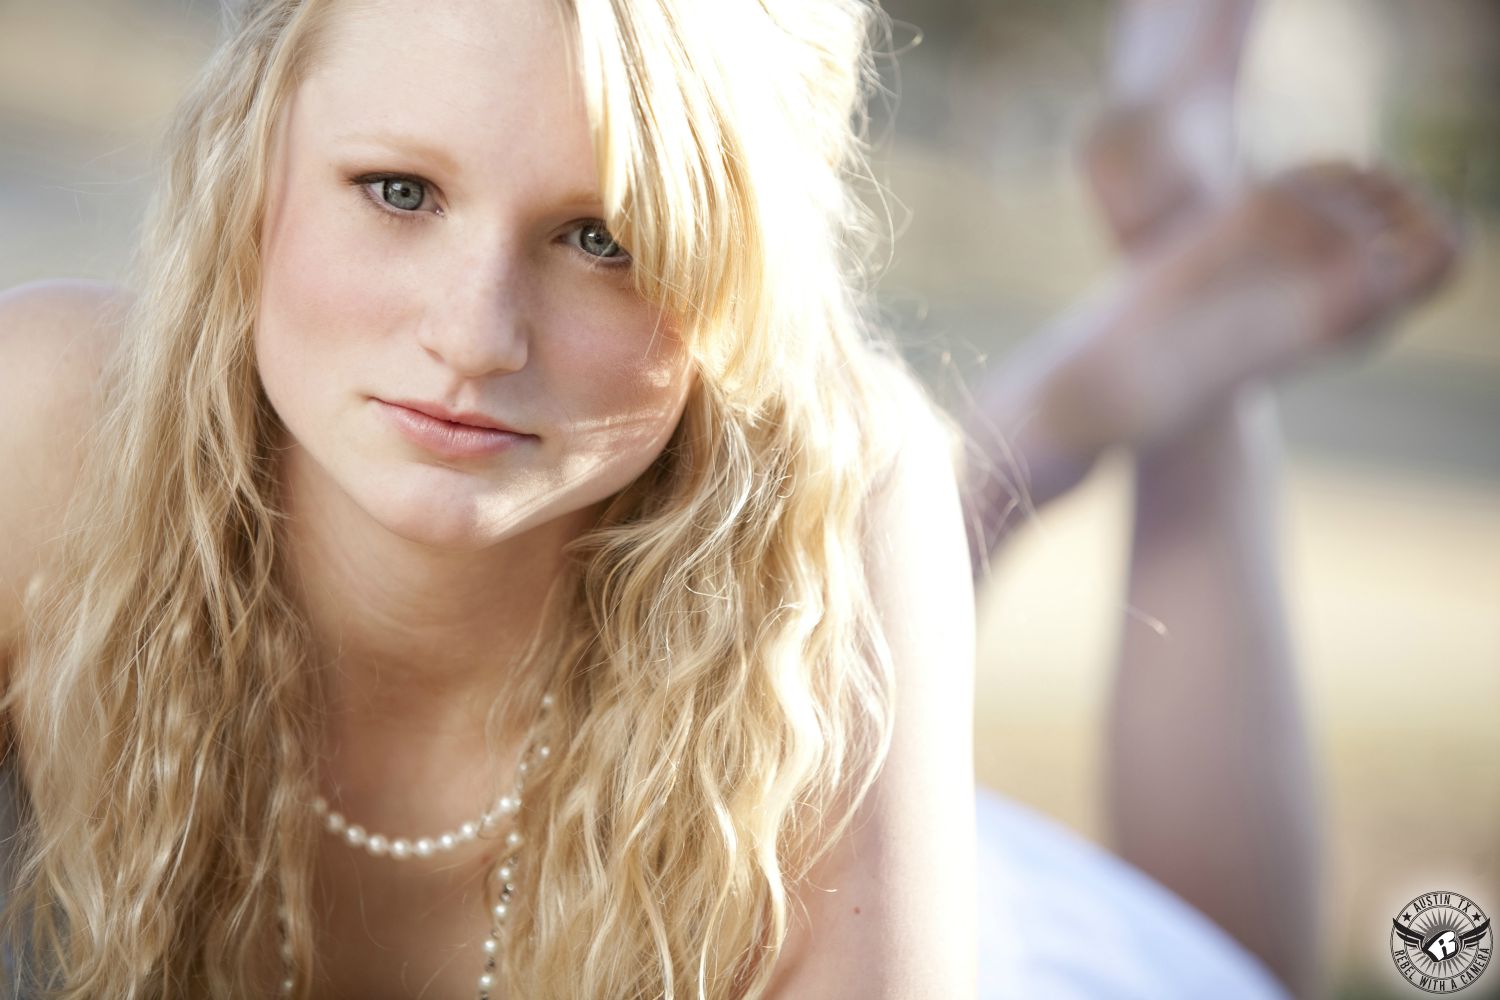 Austin senior portraits of blonde girl in white dress and pearls with hair and makeup by Divaz Fabula.